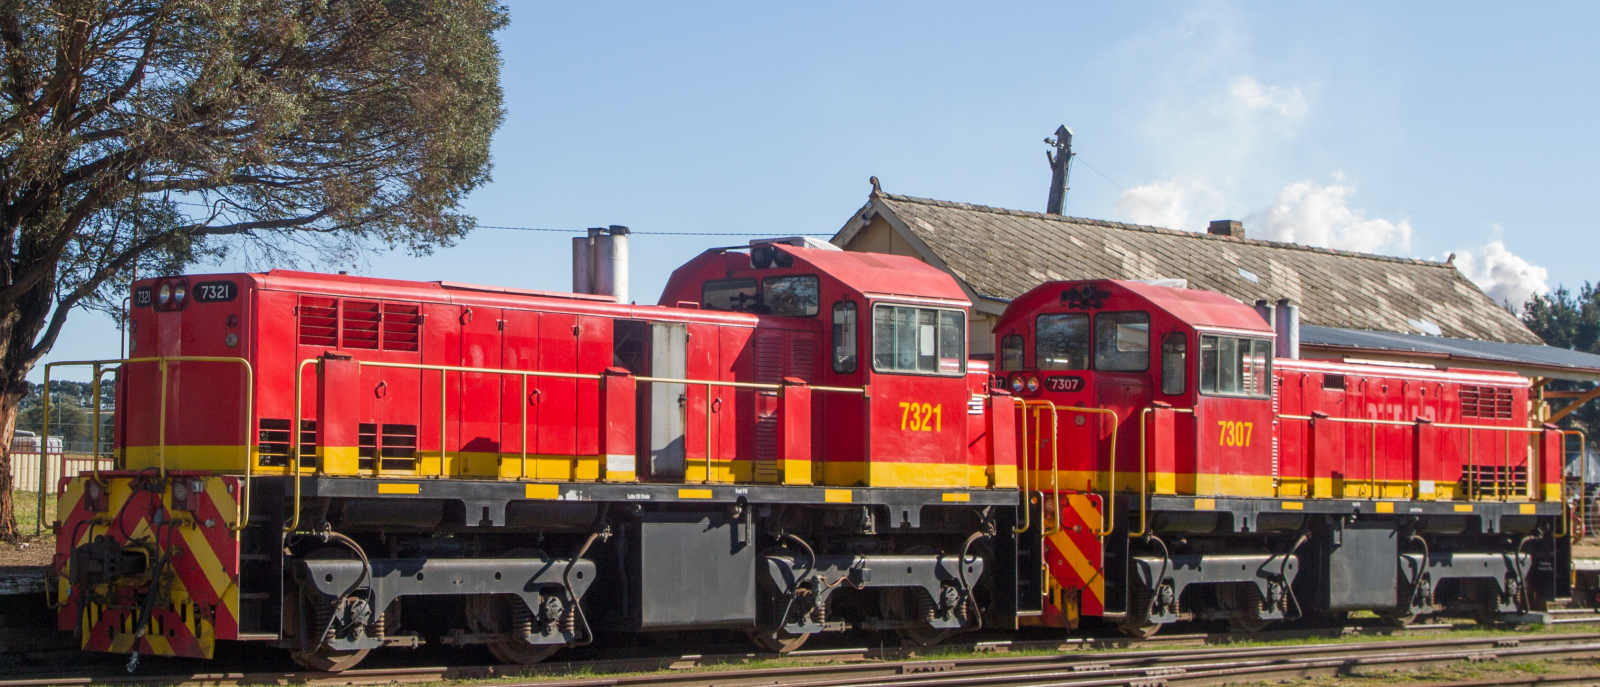 Nos. 7321 and 7307 in July 2014 in Oberon, New South Wales